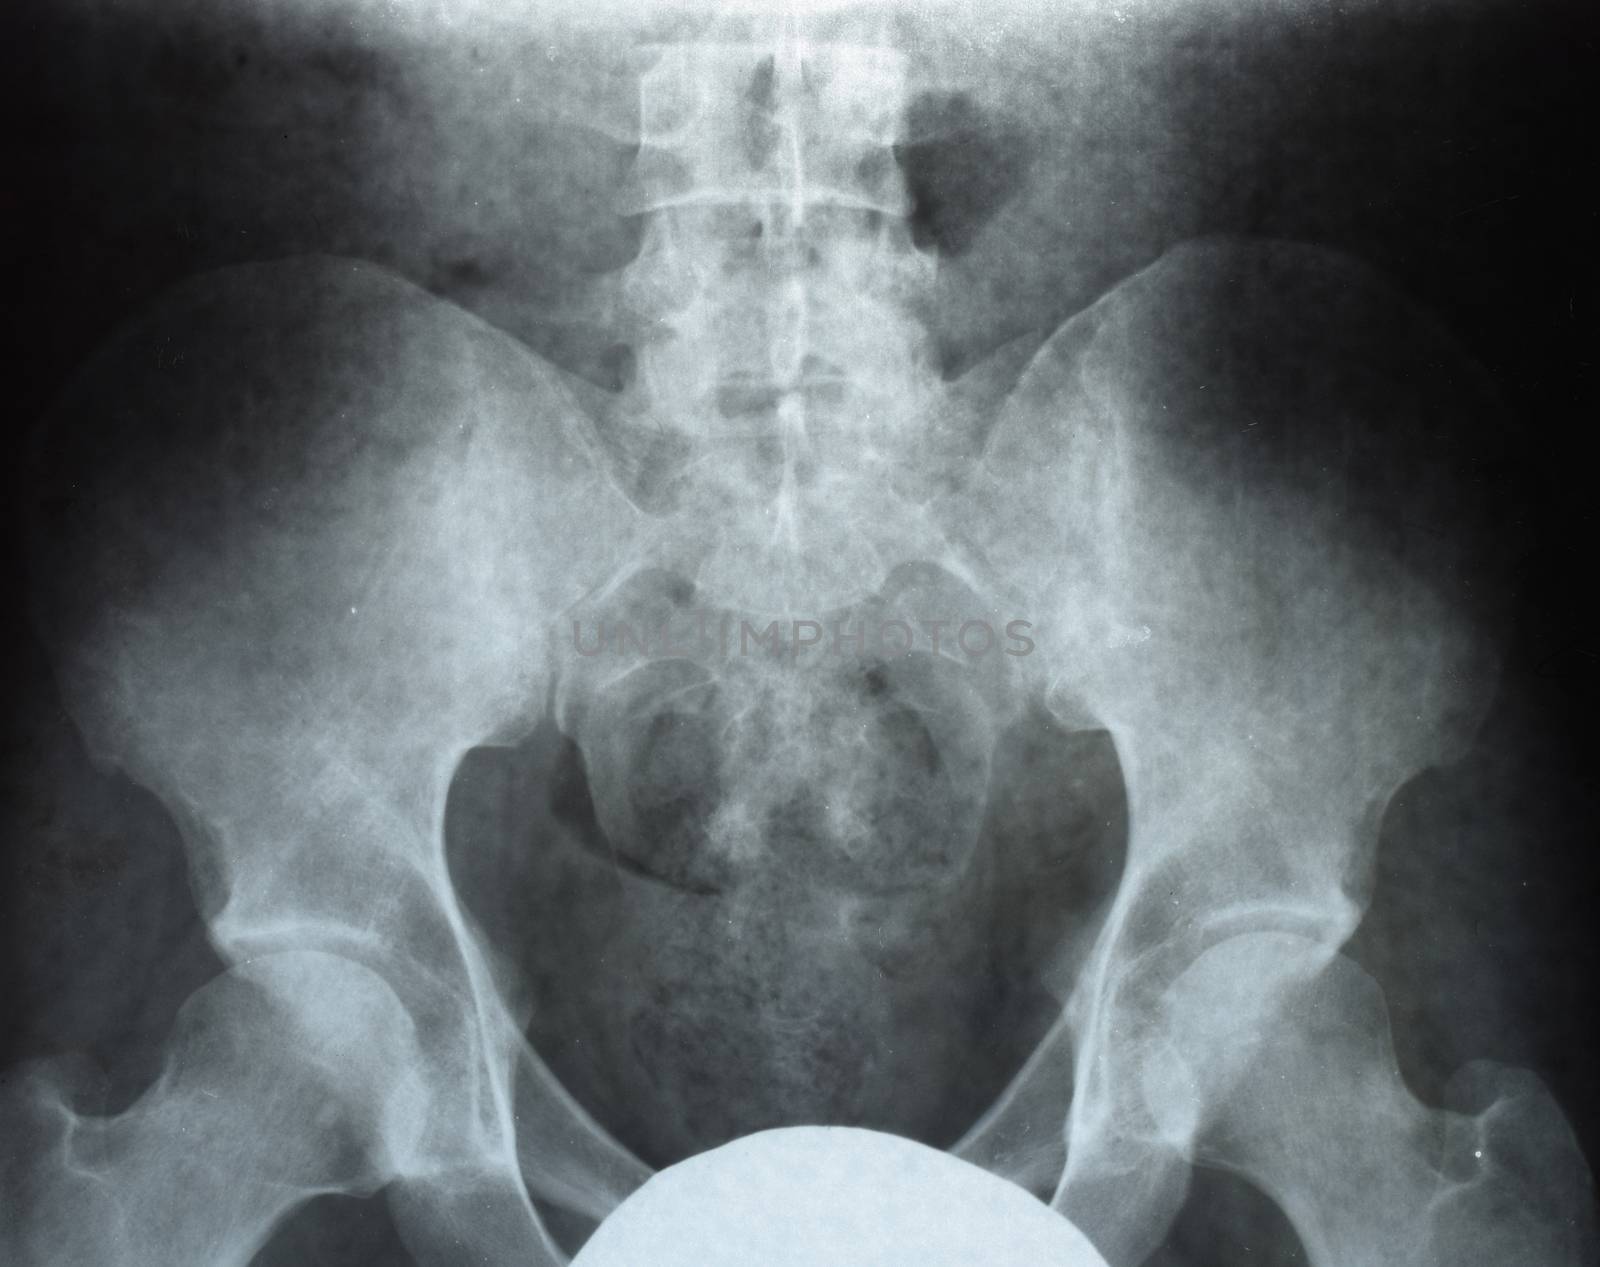 X-ray of the pelvis and sacrum. X-ray by eleonimages